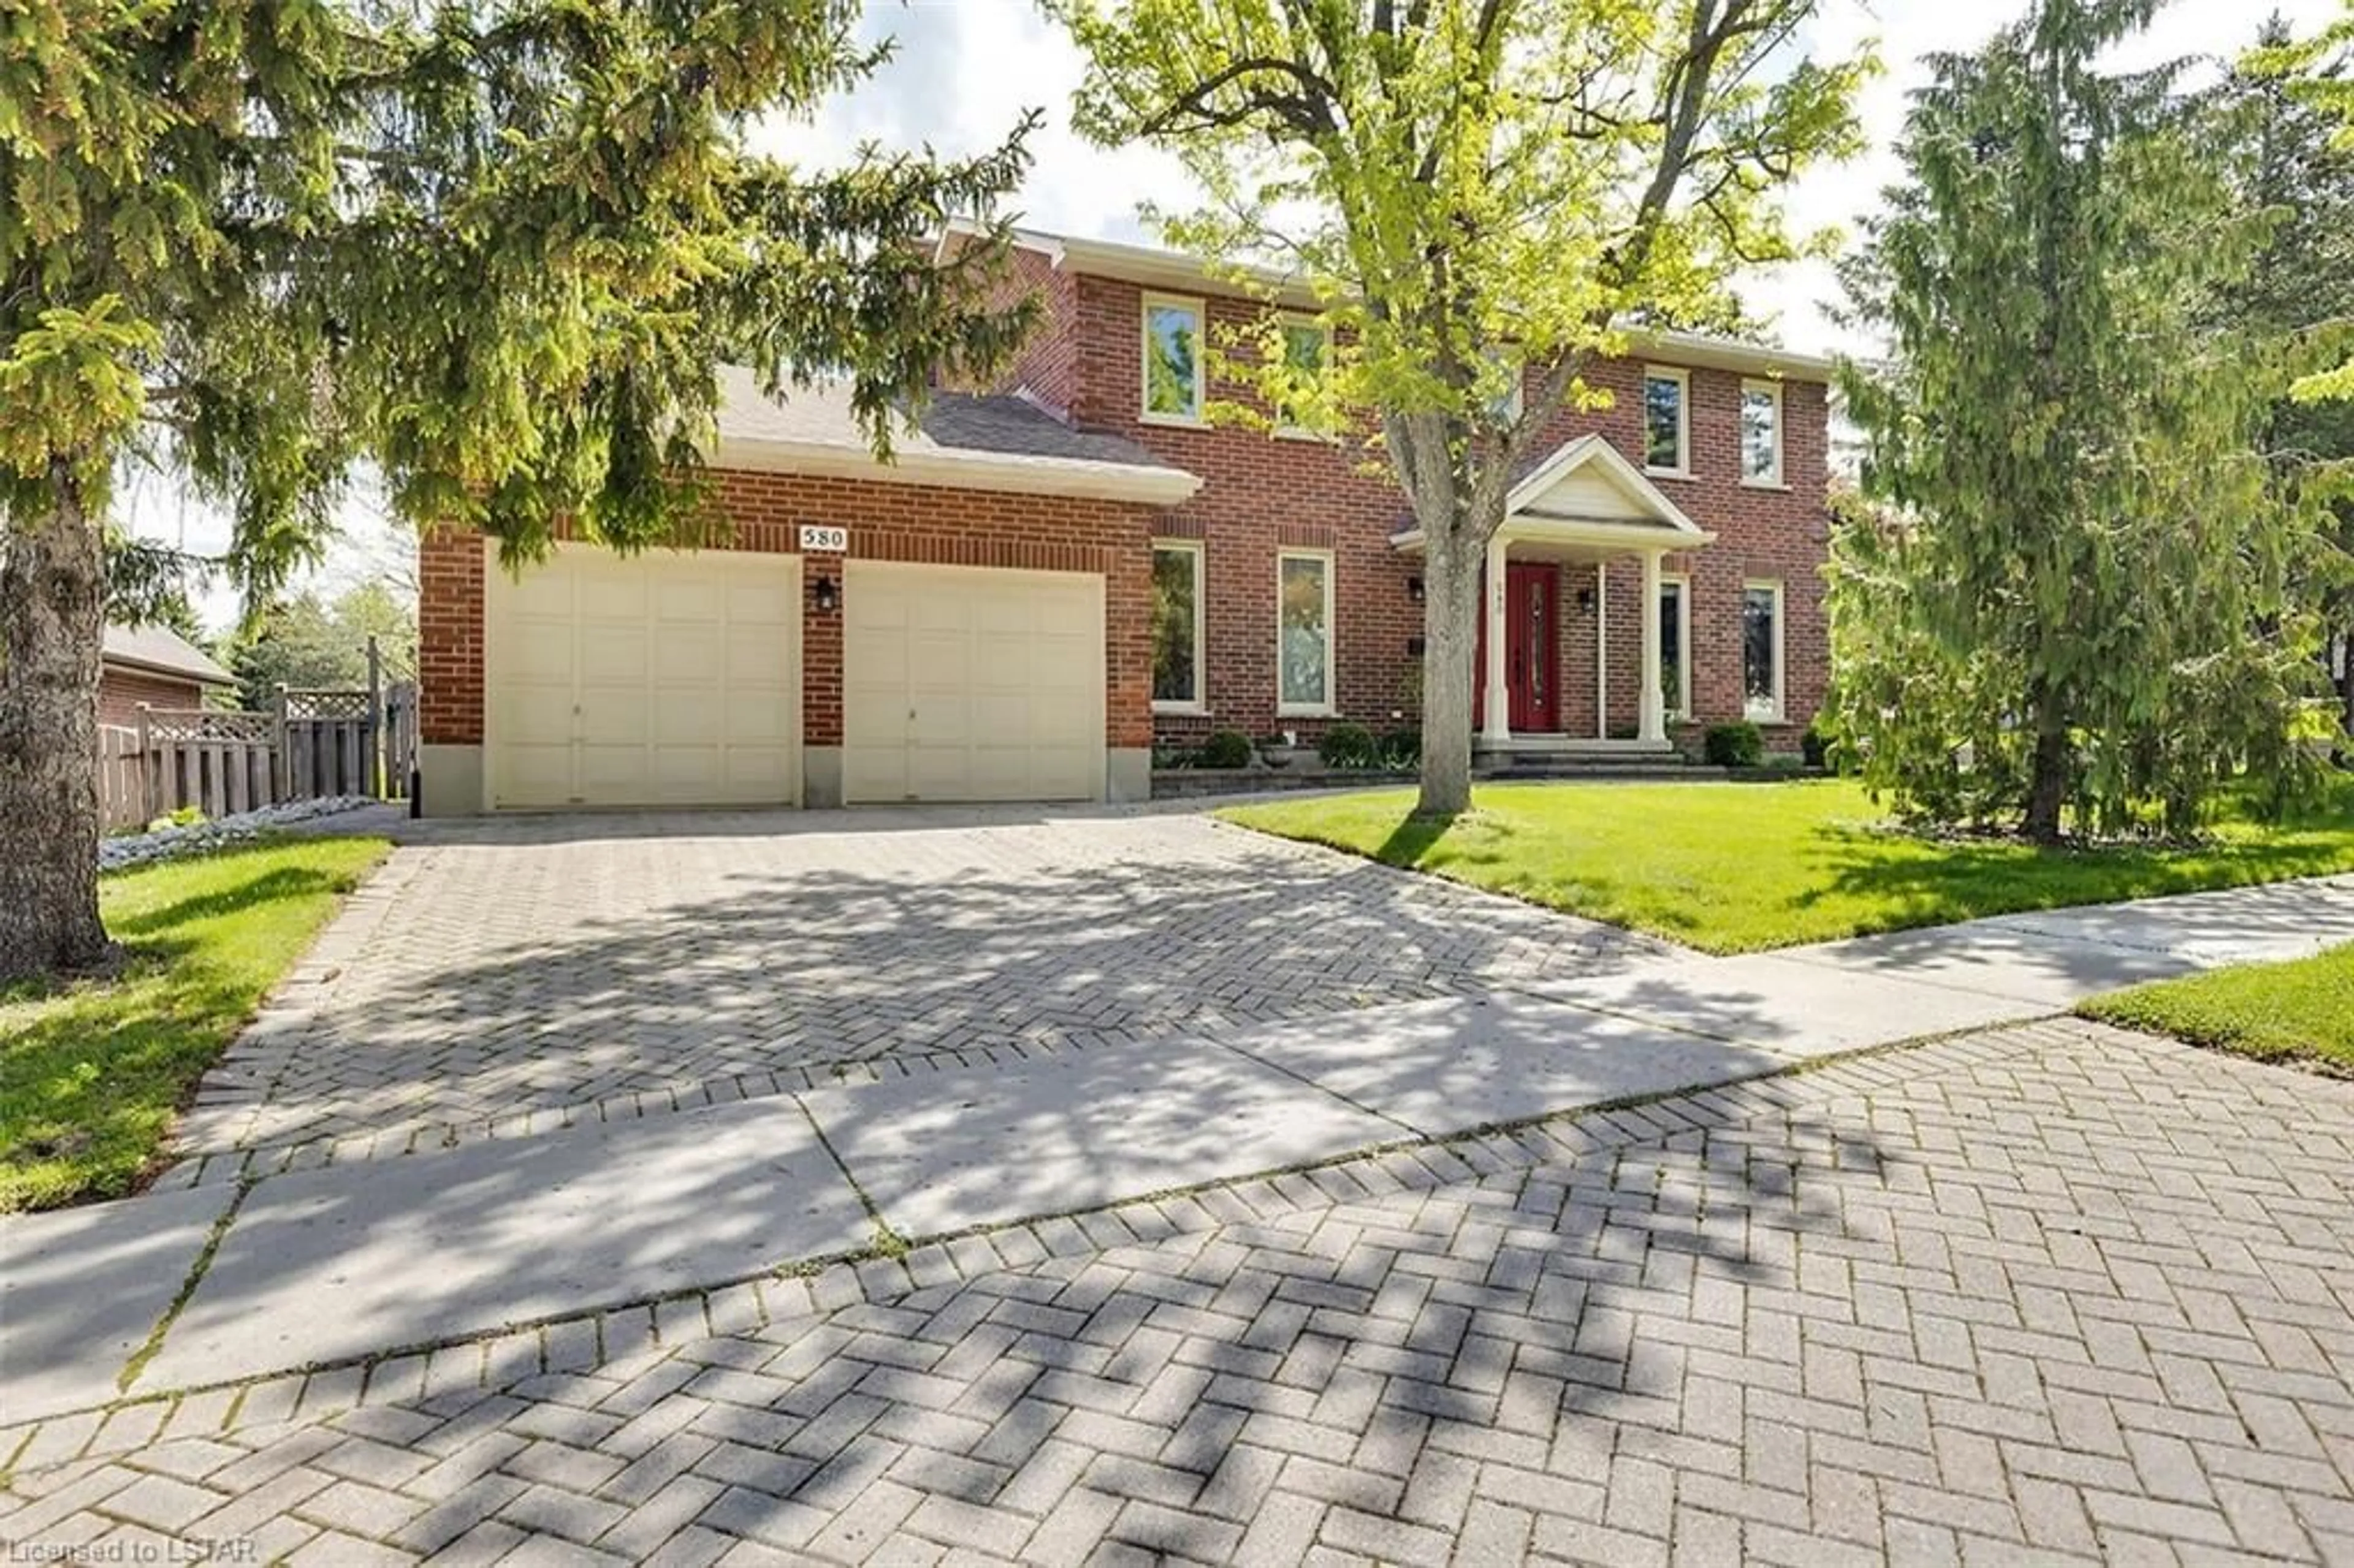 Home with brick exterior material for 580 Rosecliffe Terr, London Ontario N6K 3Y2